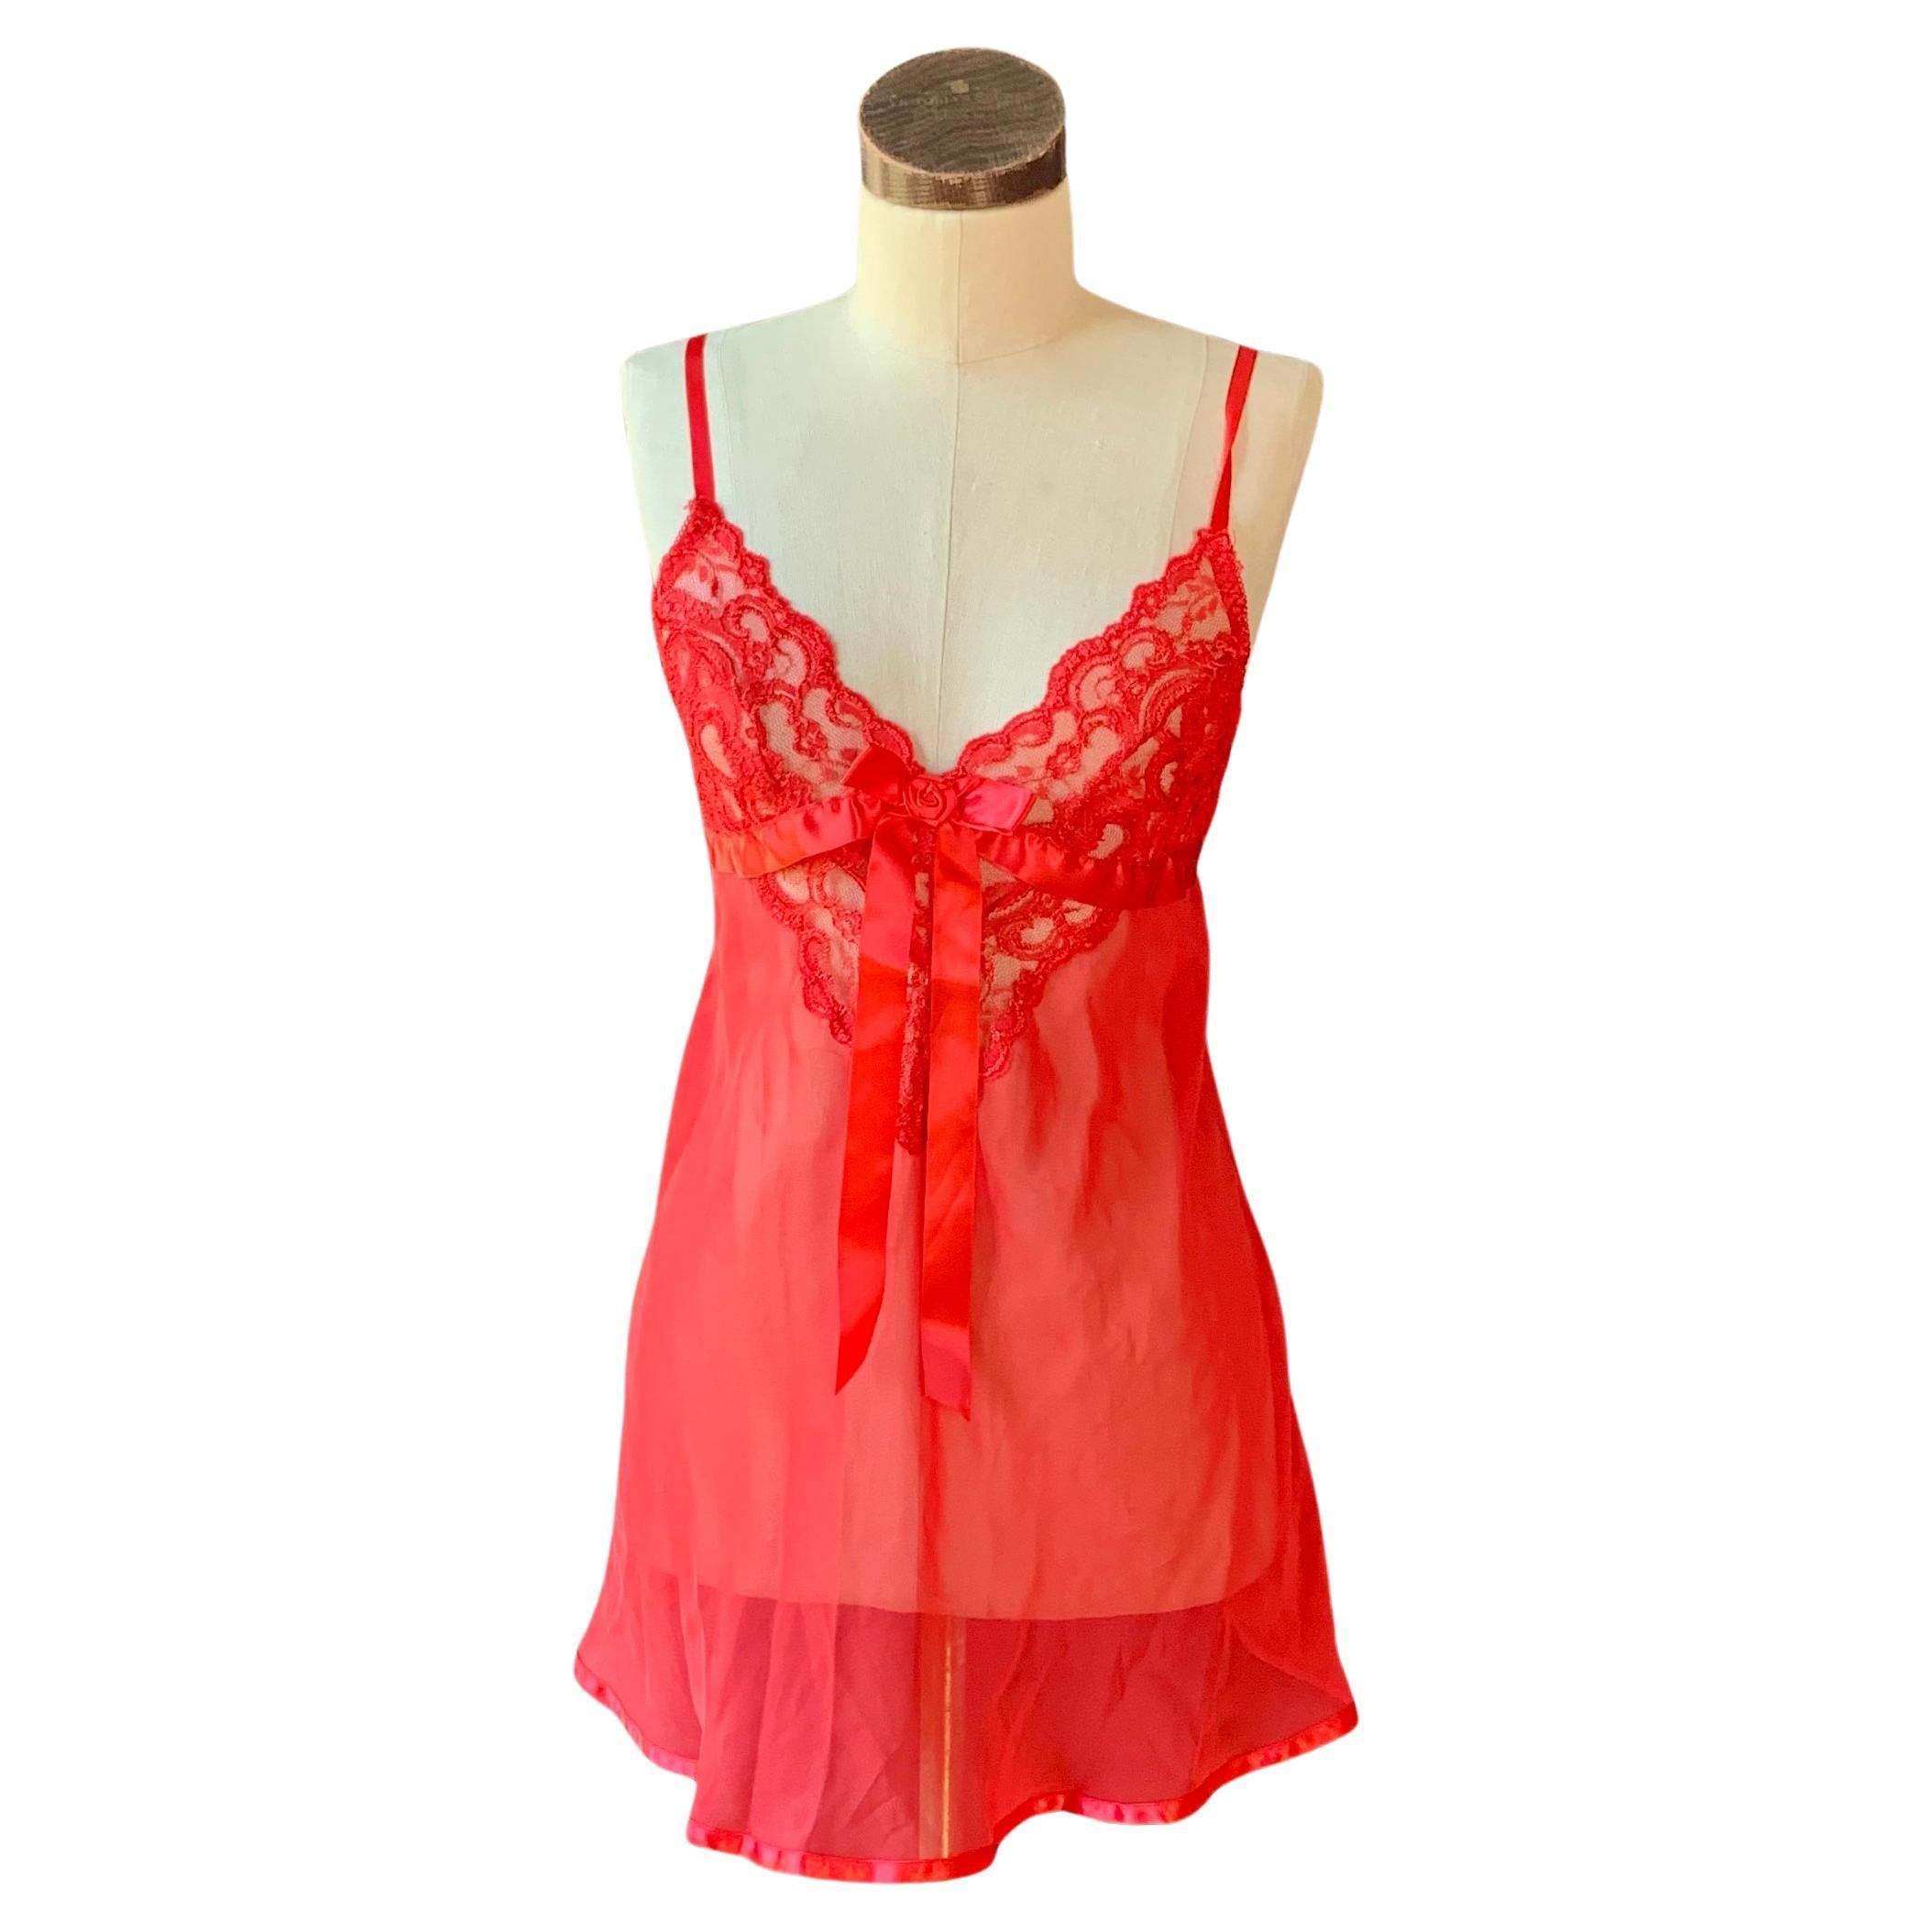 Vintage UNFORGETTABLE Babydoll Nightie SEXY Nightgown Red Lace Bow SATIN Small